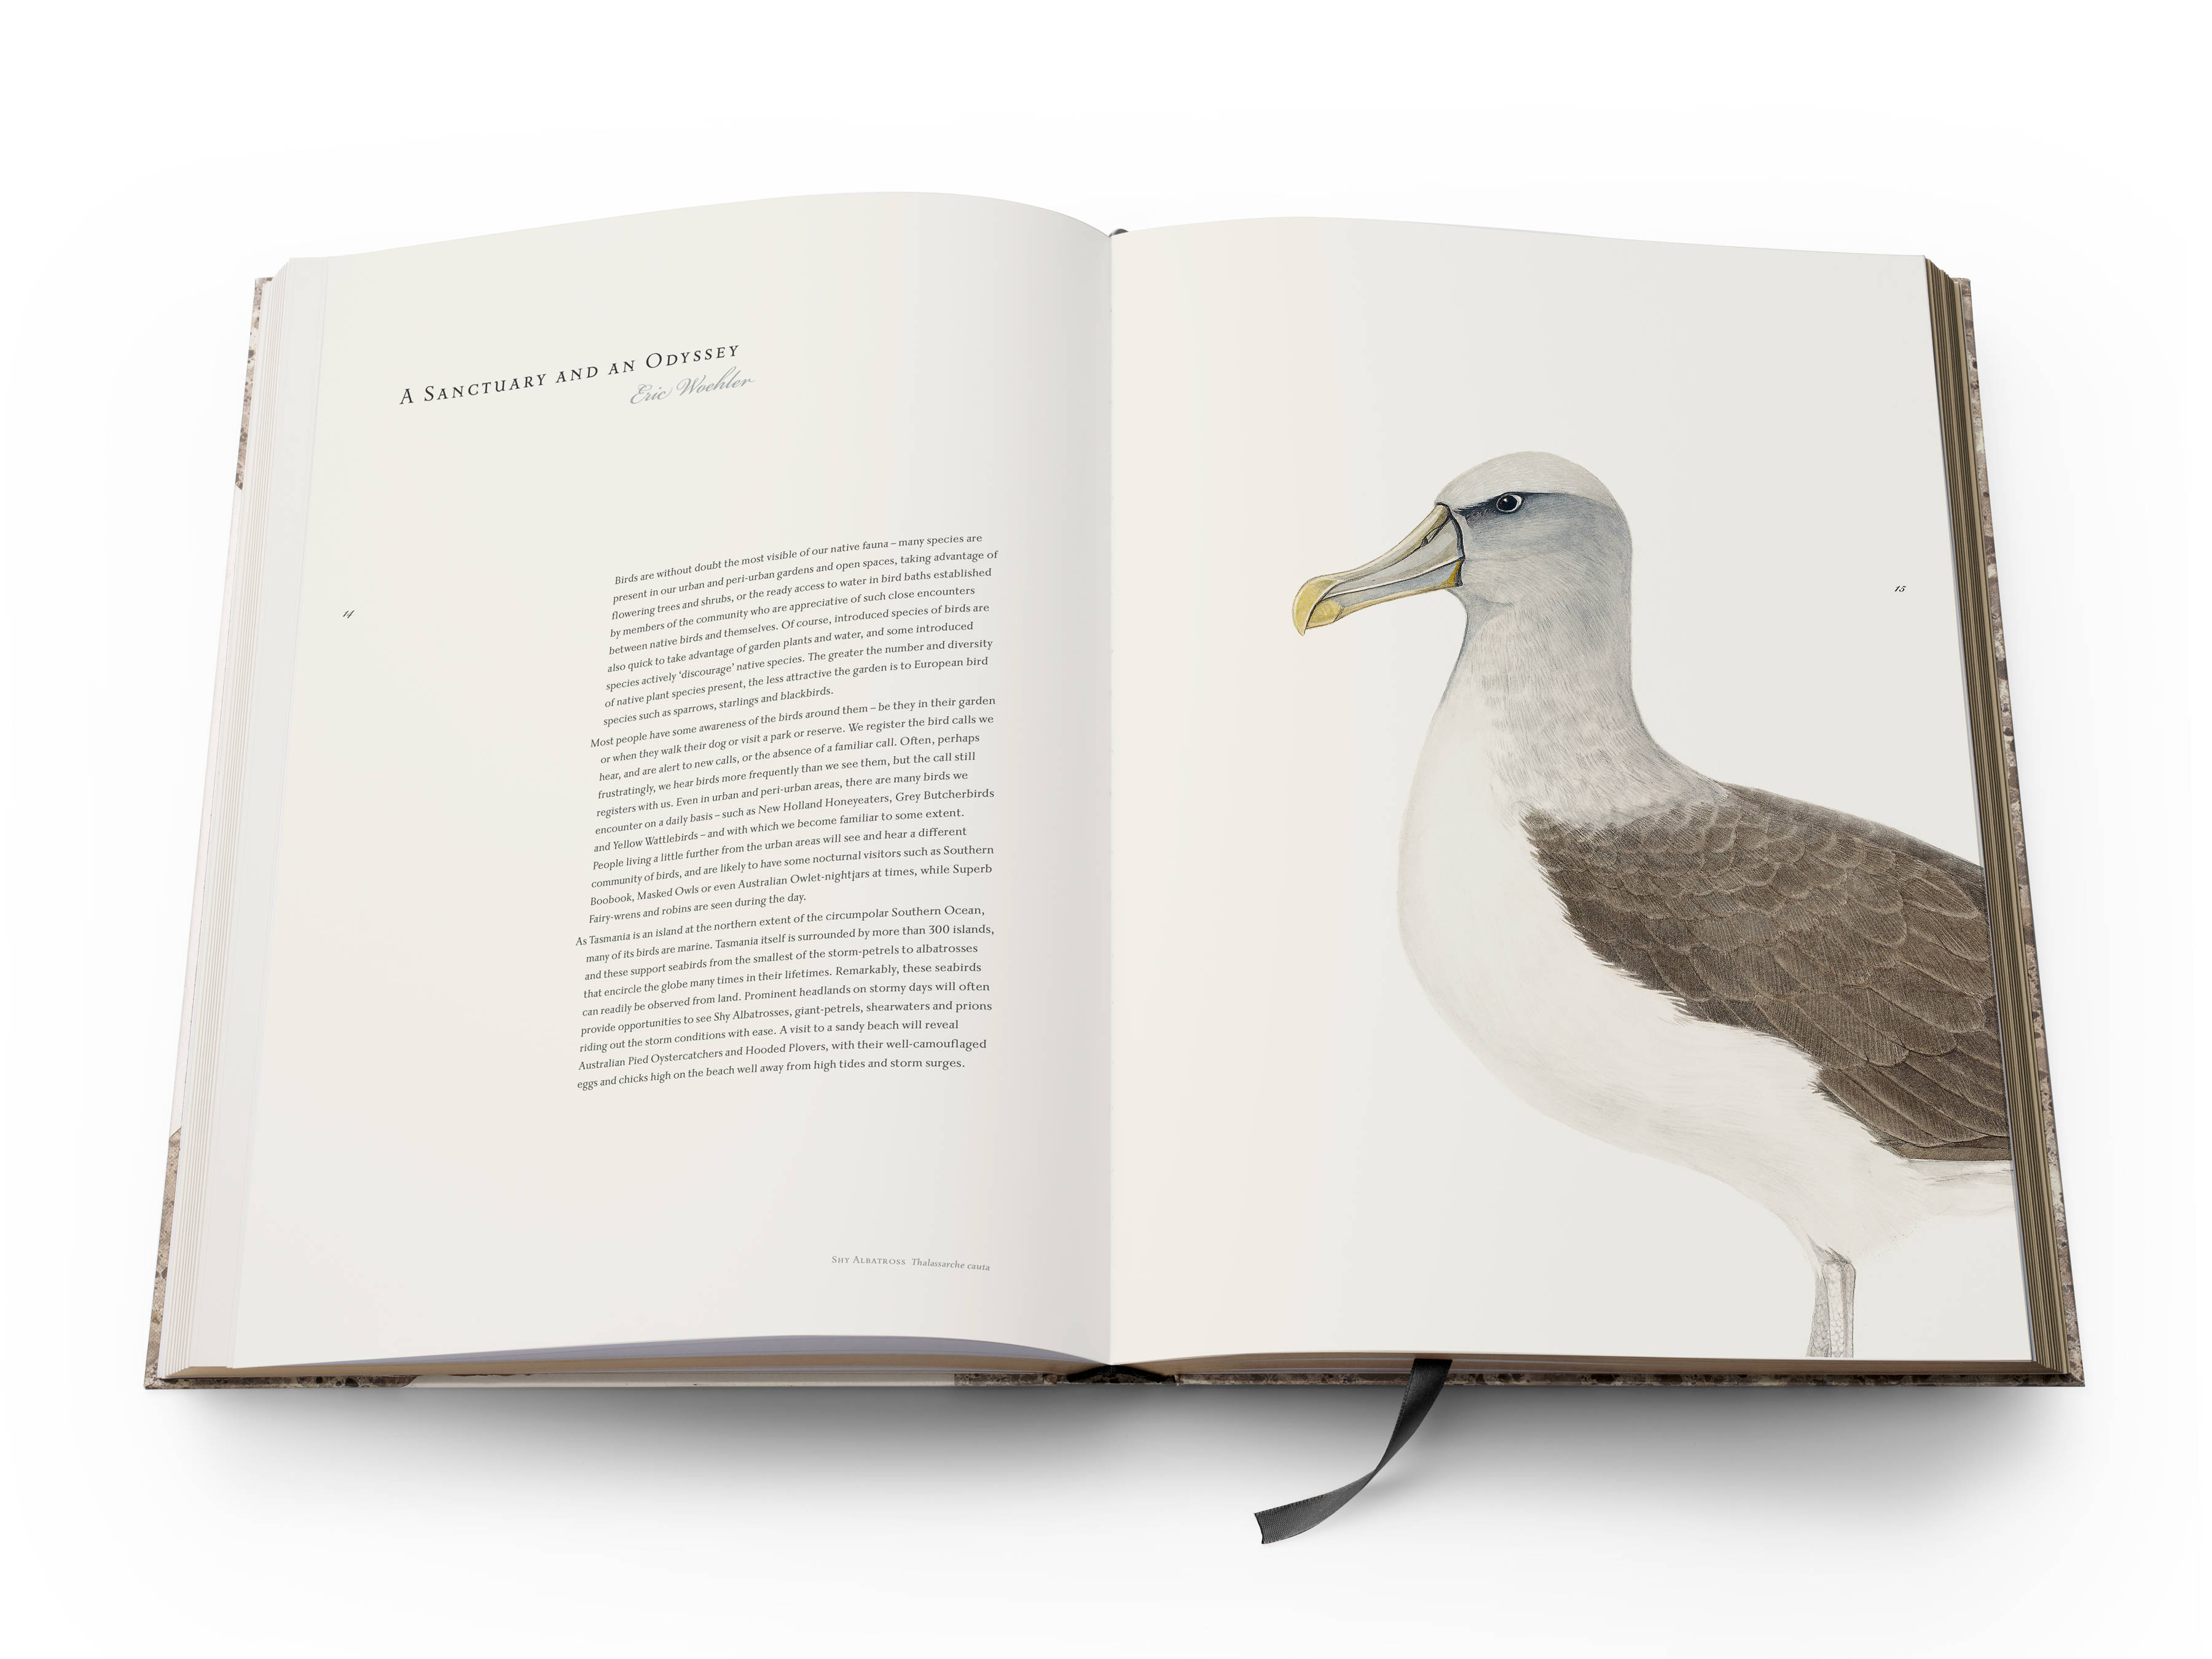 A double page spread from the book with essay text by Dr Eric Woehler on the left and a full-page colour plate of a Shy Albatross ‘Thalassarche cauta’ on the right.